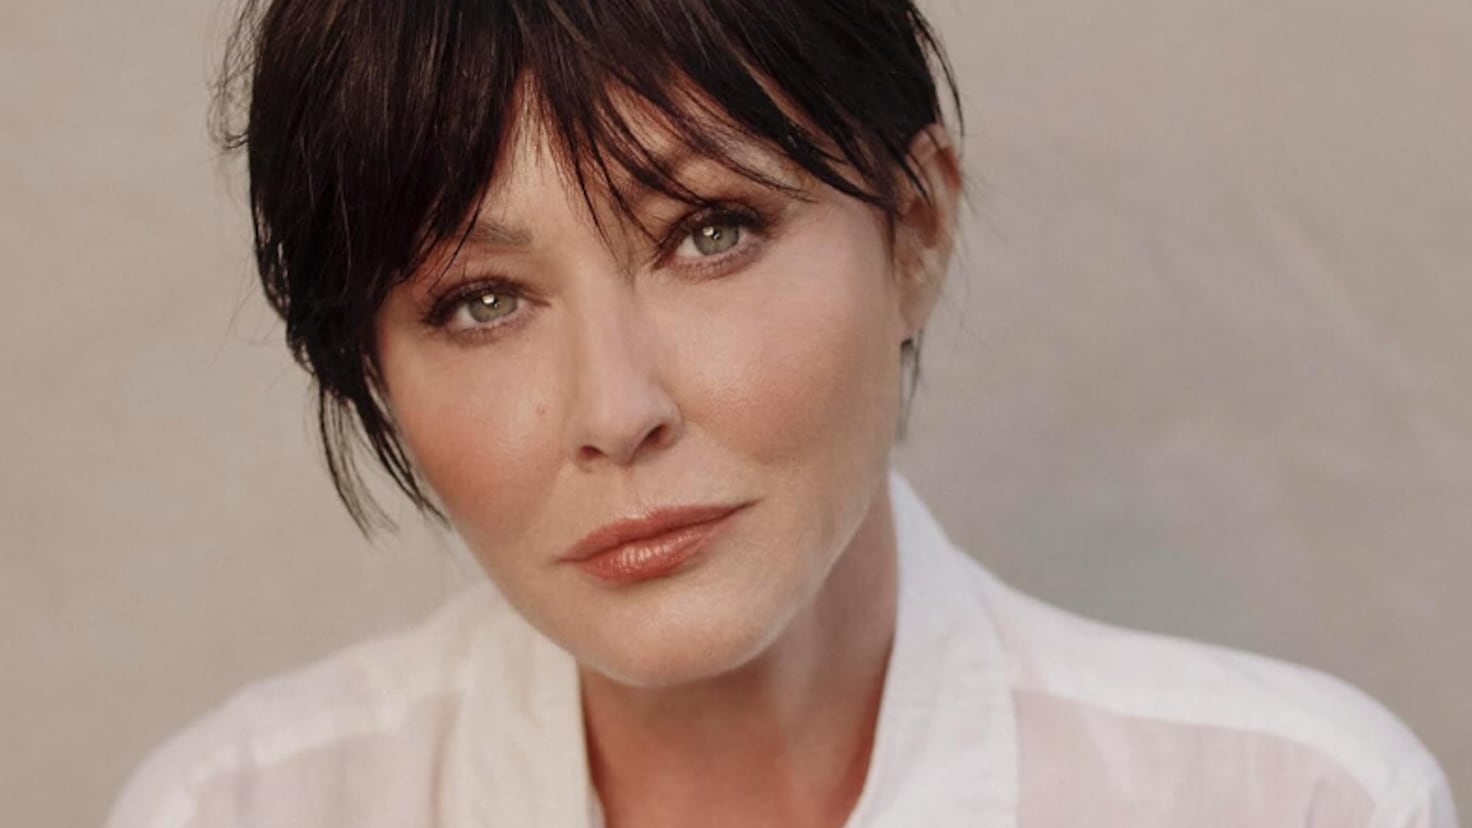 Shannen Doherty enters a new phase of chemotherapy: I don't know how long it will last
